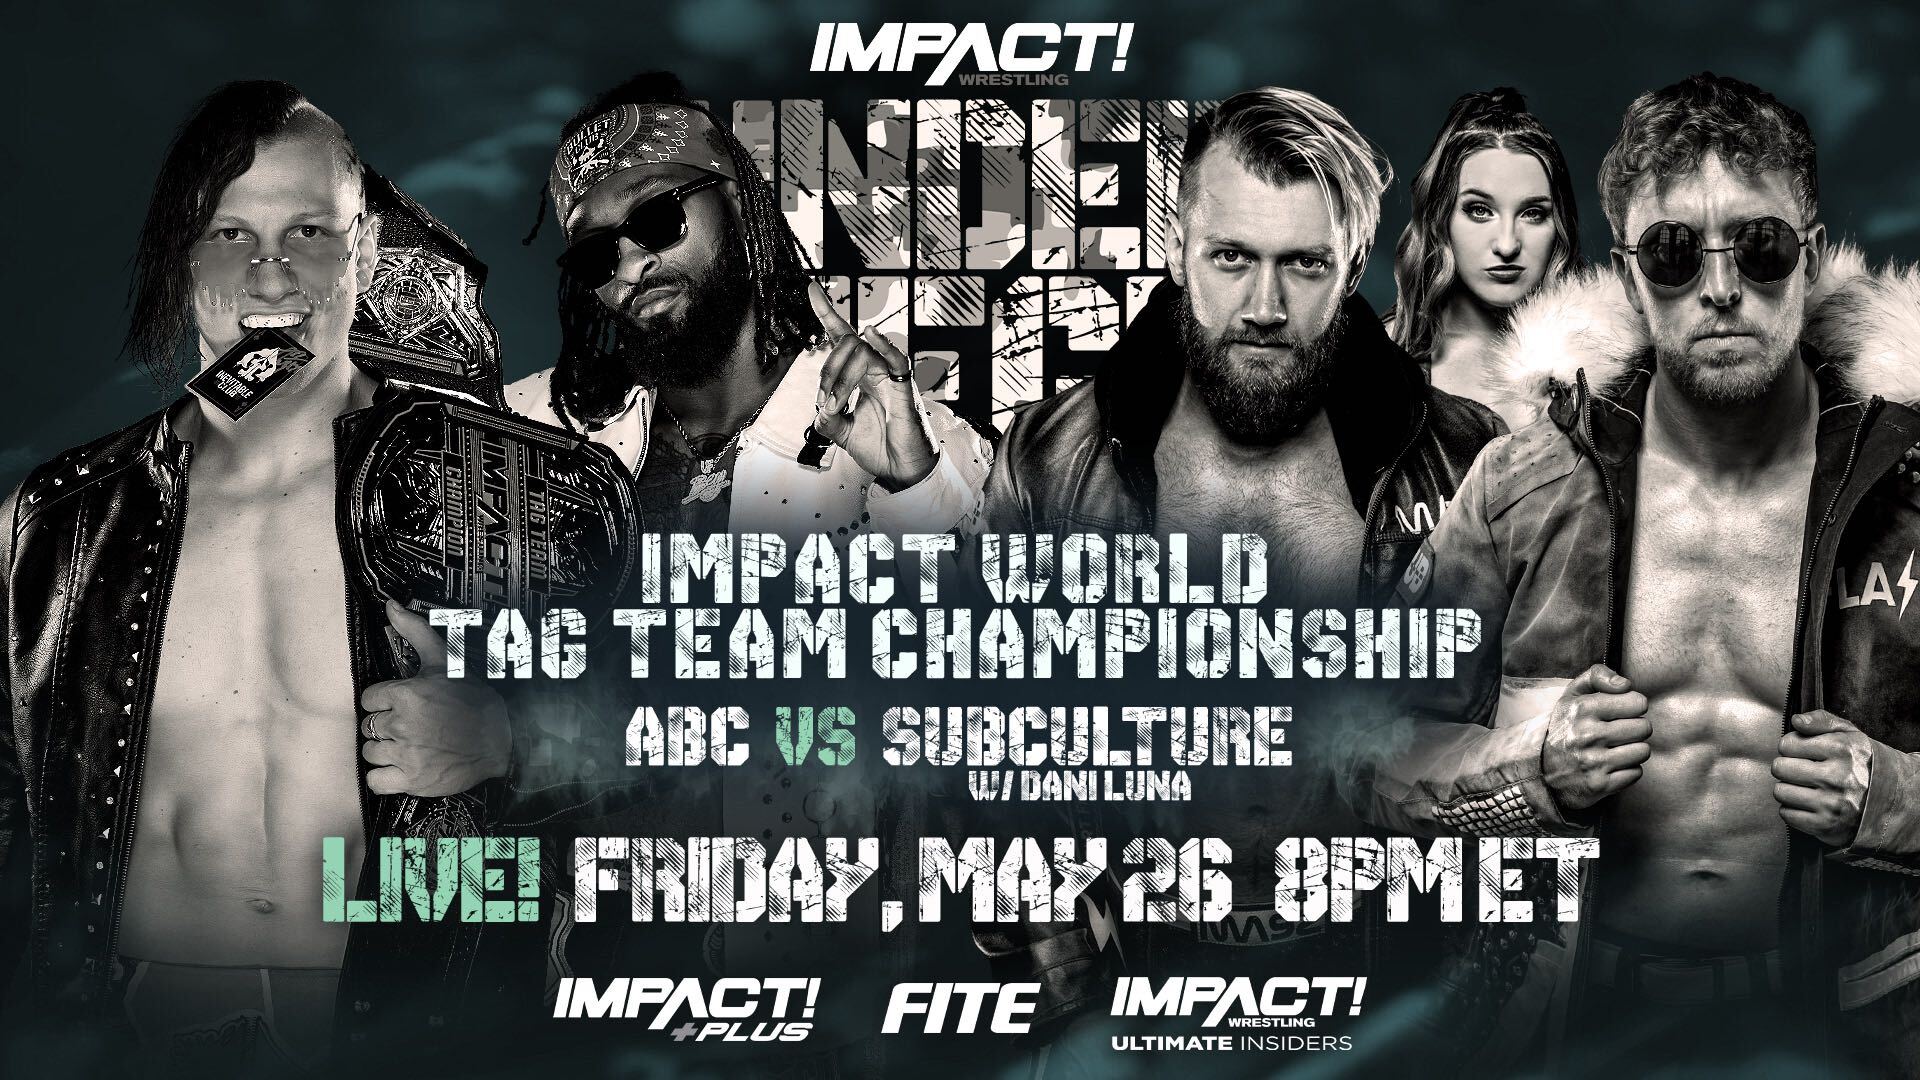 Former WWE Tag Team To Debut For Impact In Title Match At Under Siege